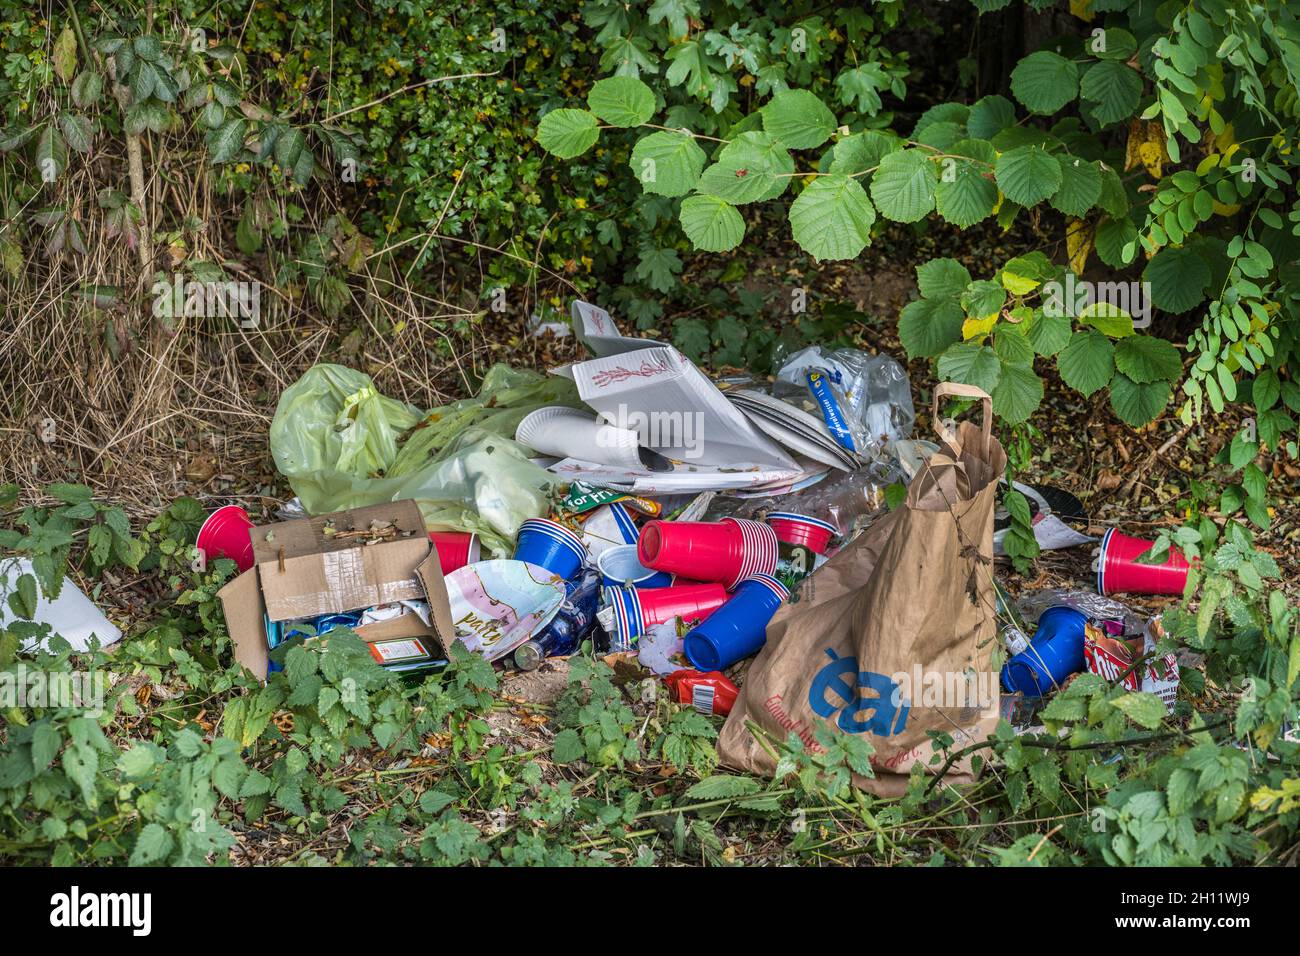 meet the environmental pig, Environmental outrage, Waste in nature, Litter, irresponsible behaviour, Pollution, man and nature, green. crime Stock Photo